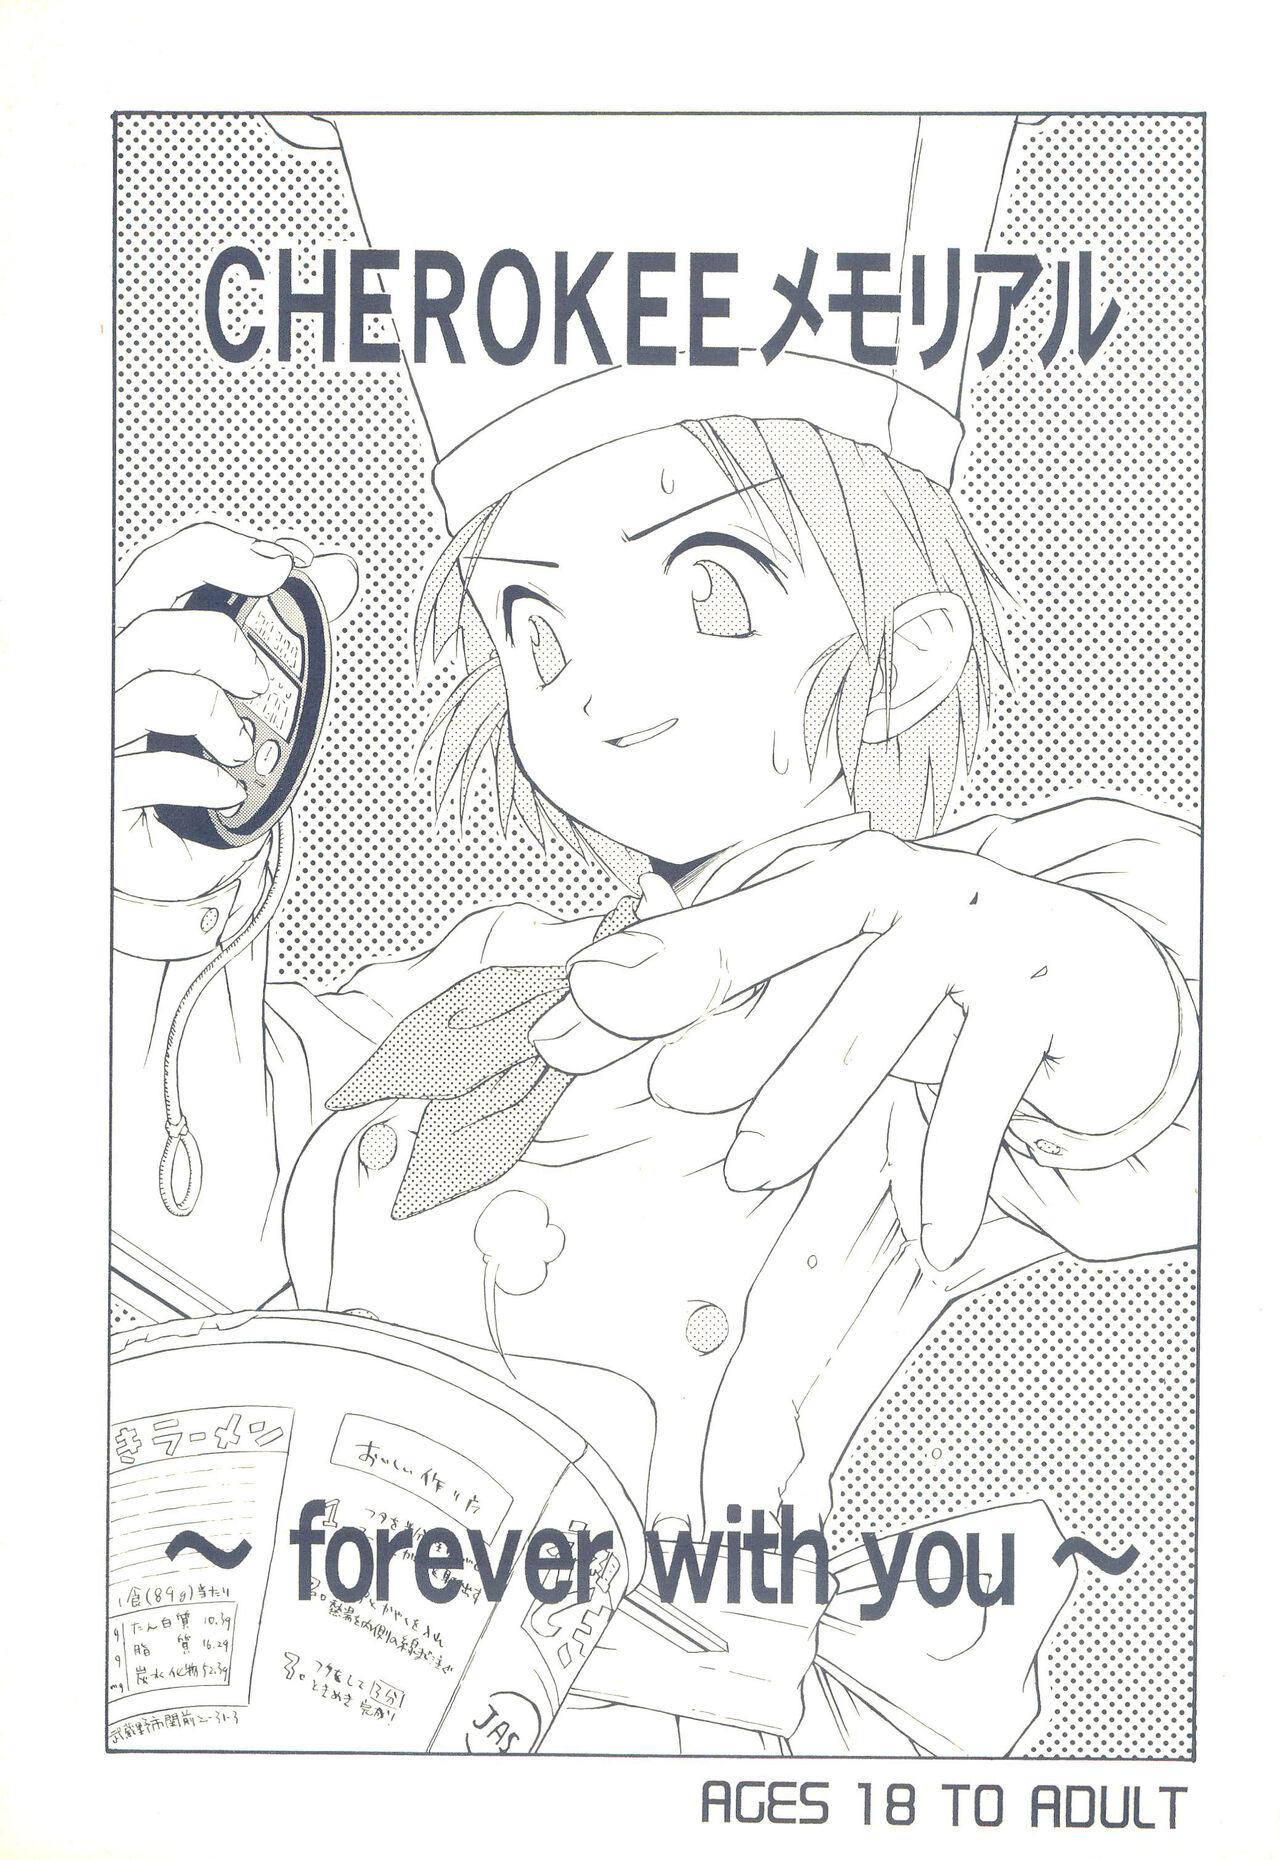 Furry CHEROKEE Memorial forever with you - Tokimeki memorial Student - Picture 1